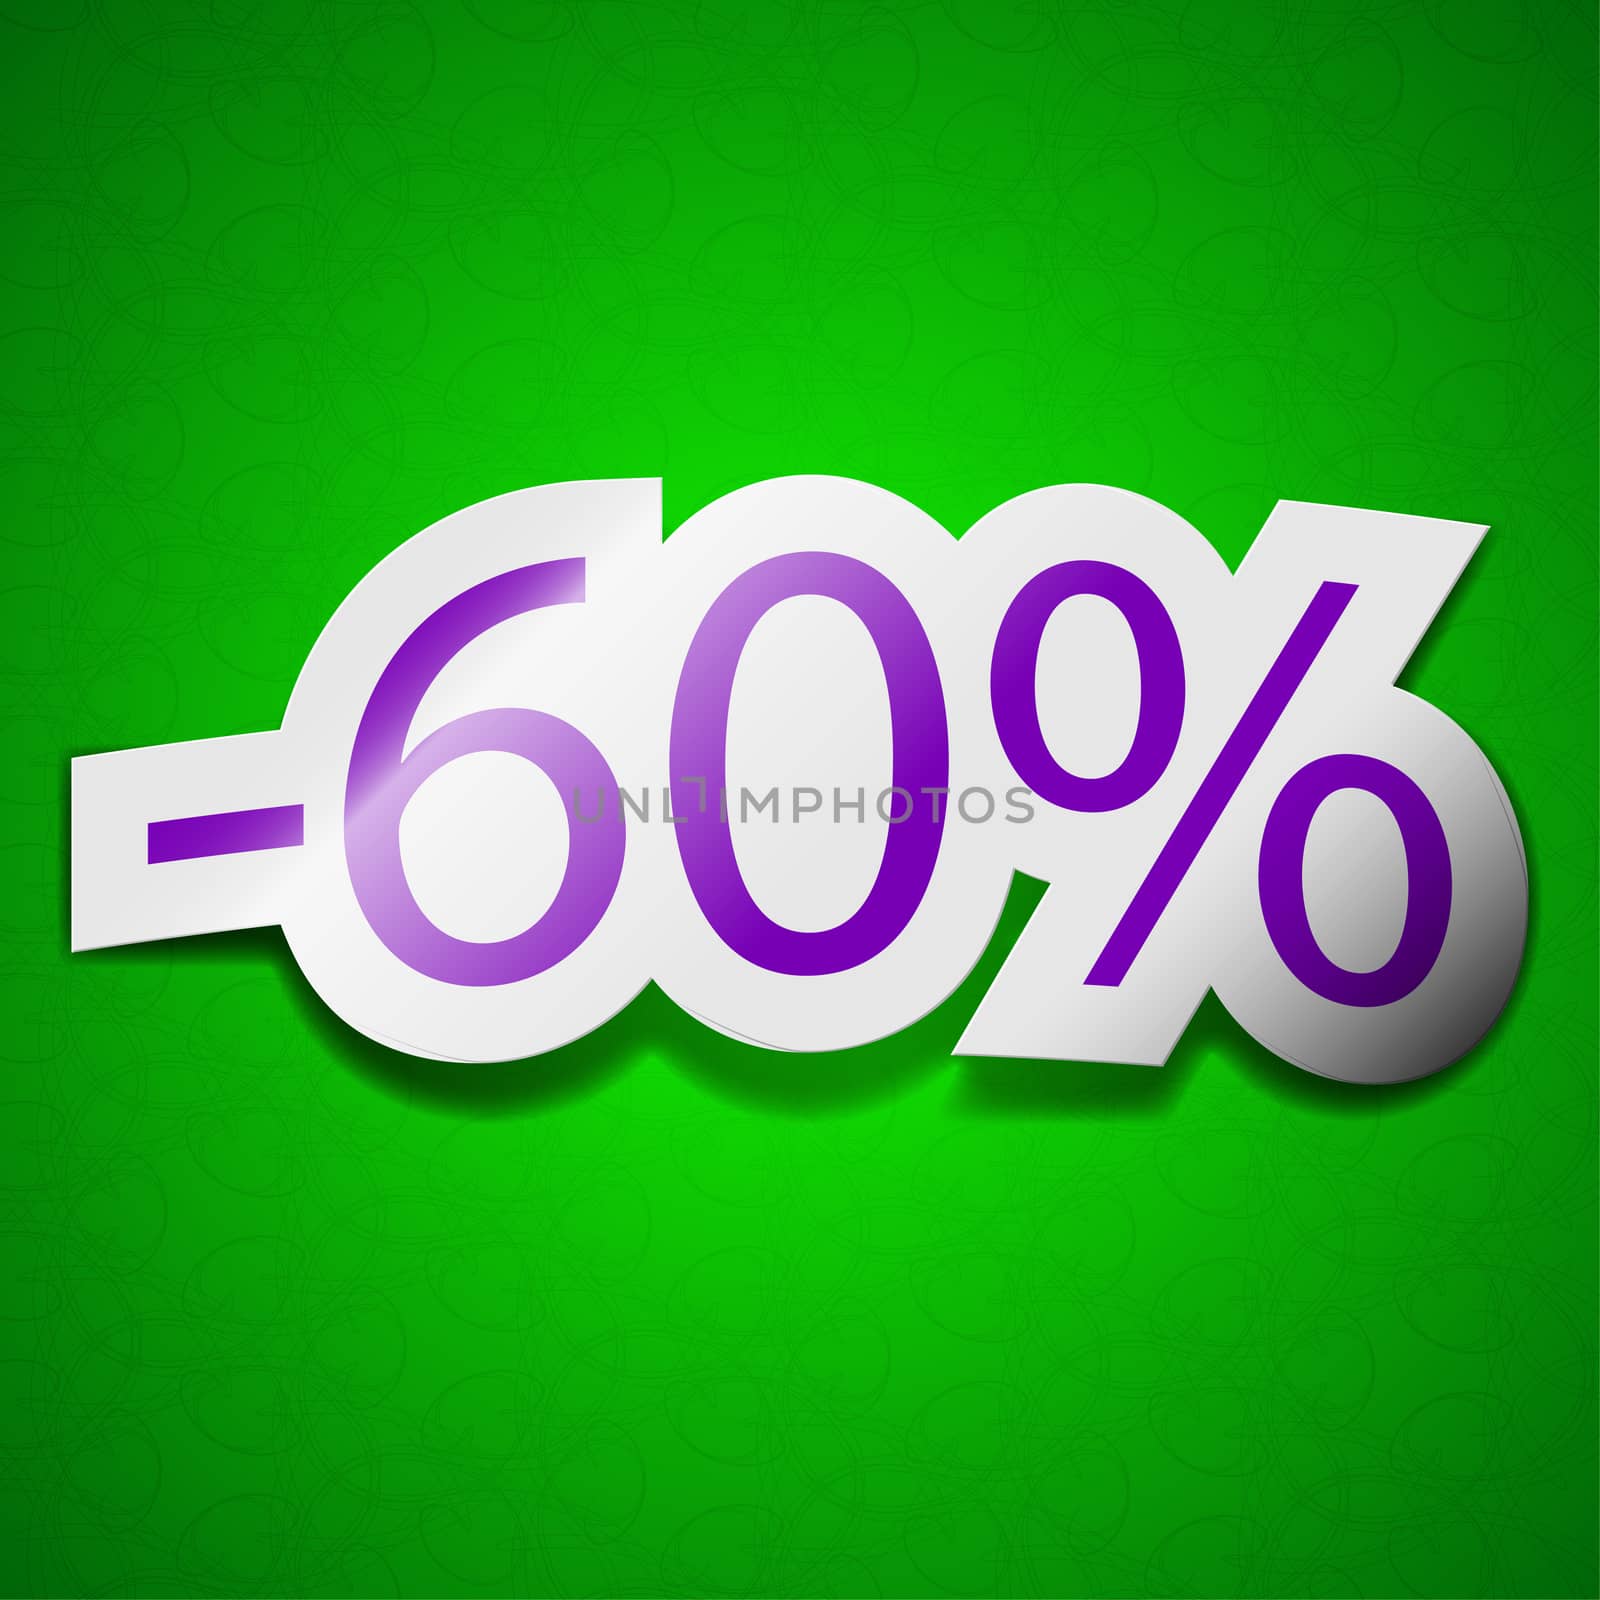 60 percent discount icon sign. Symbol chic colored sticky label on green background.  illustration